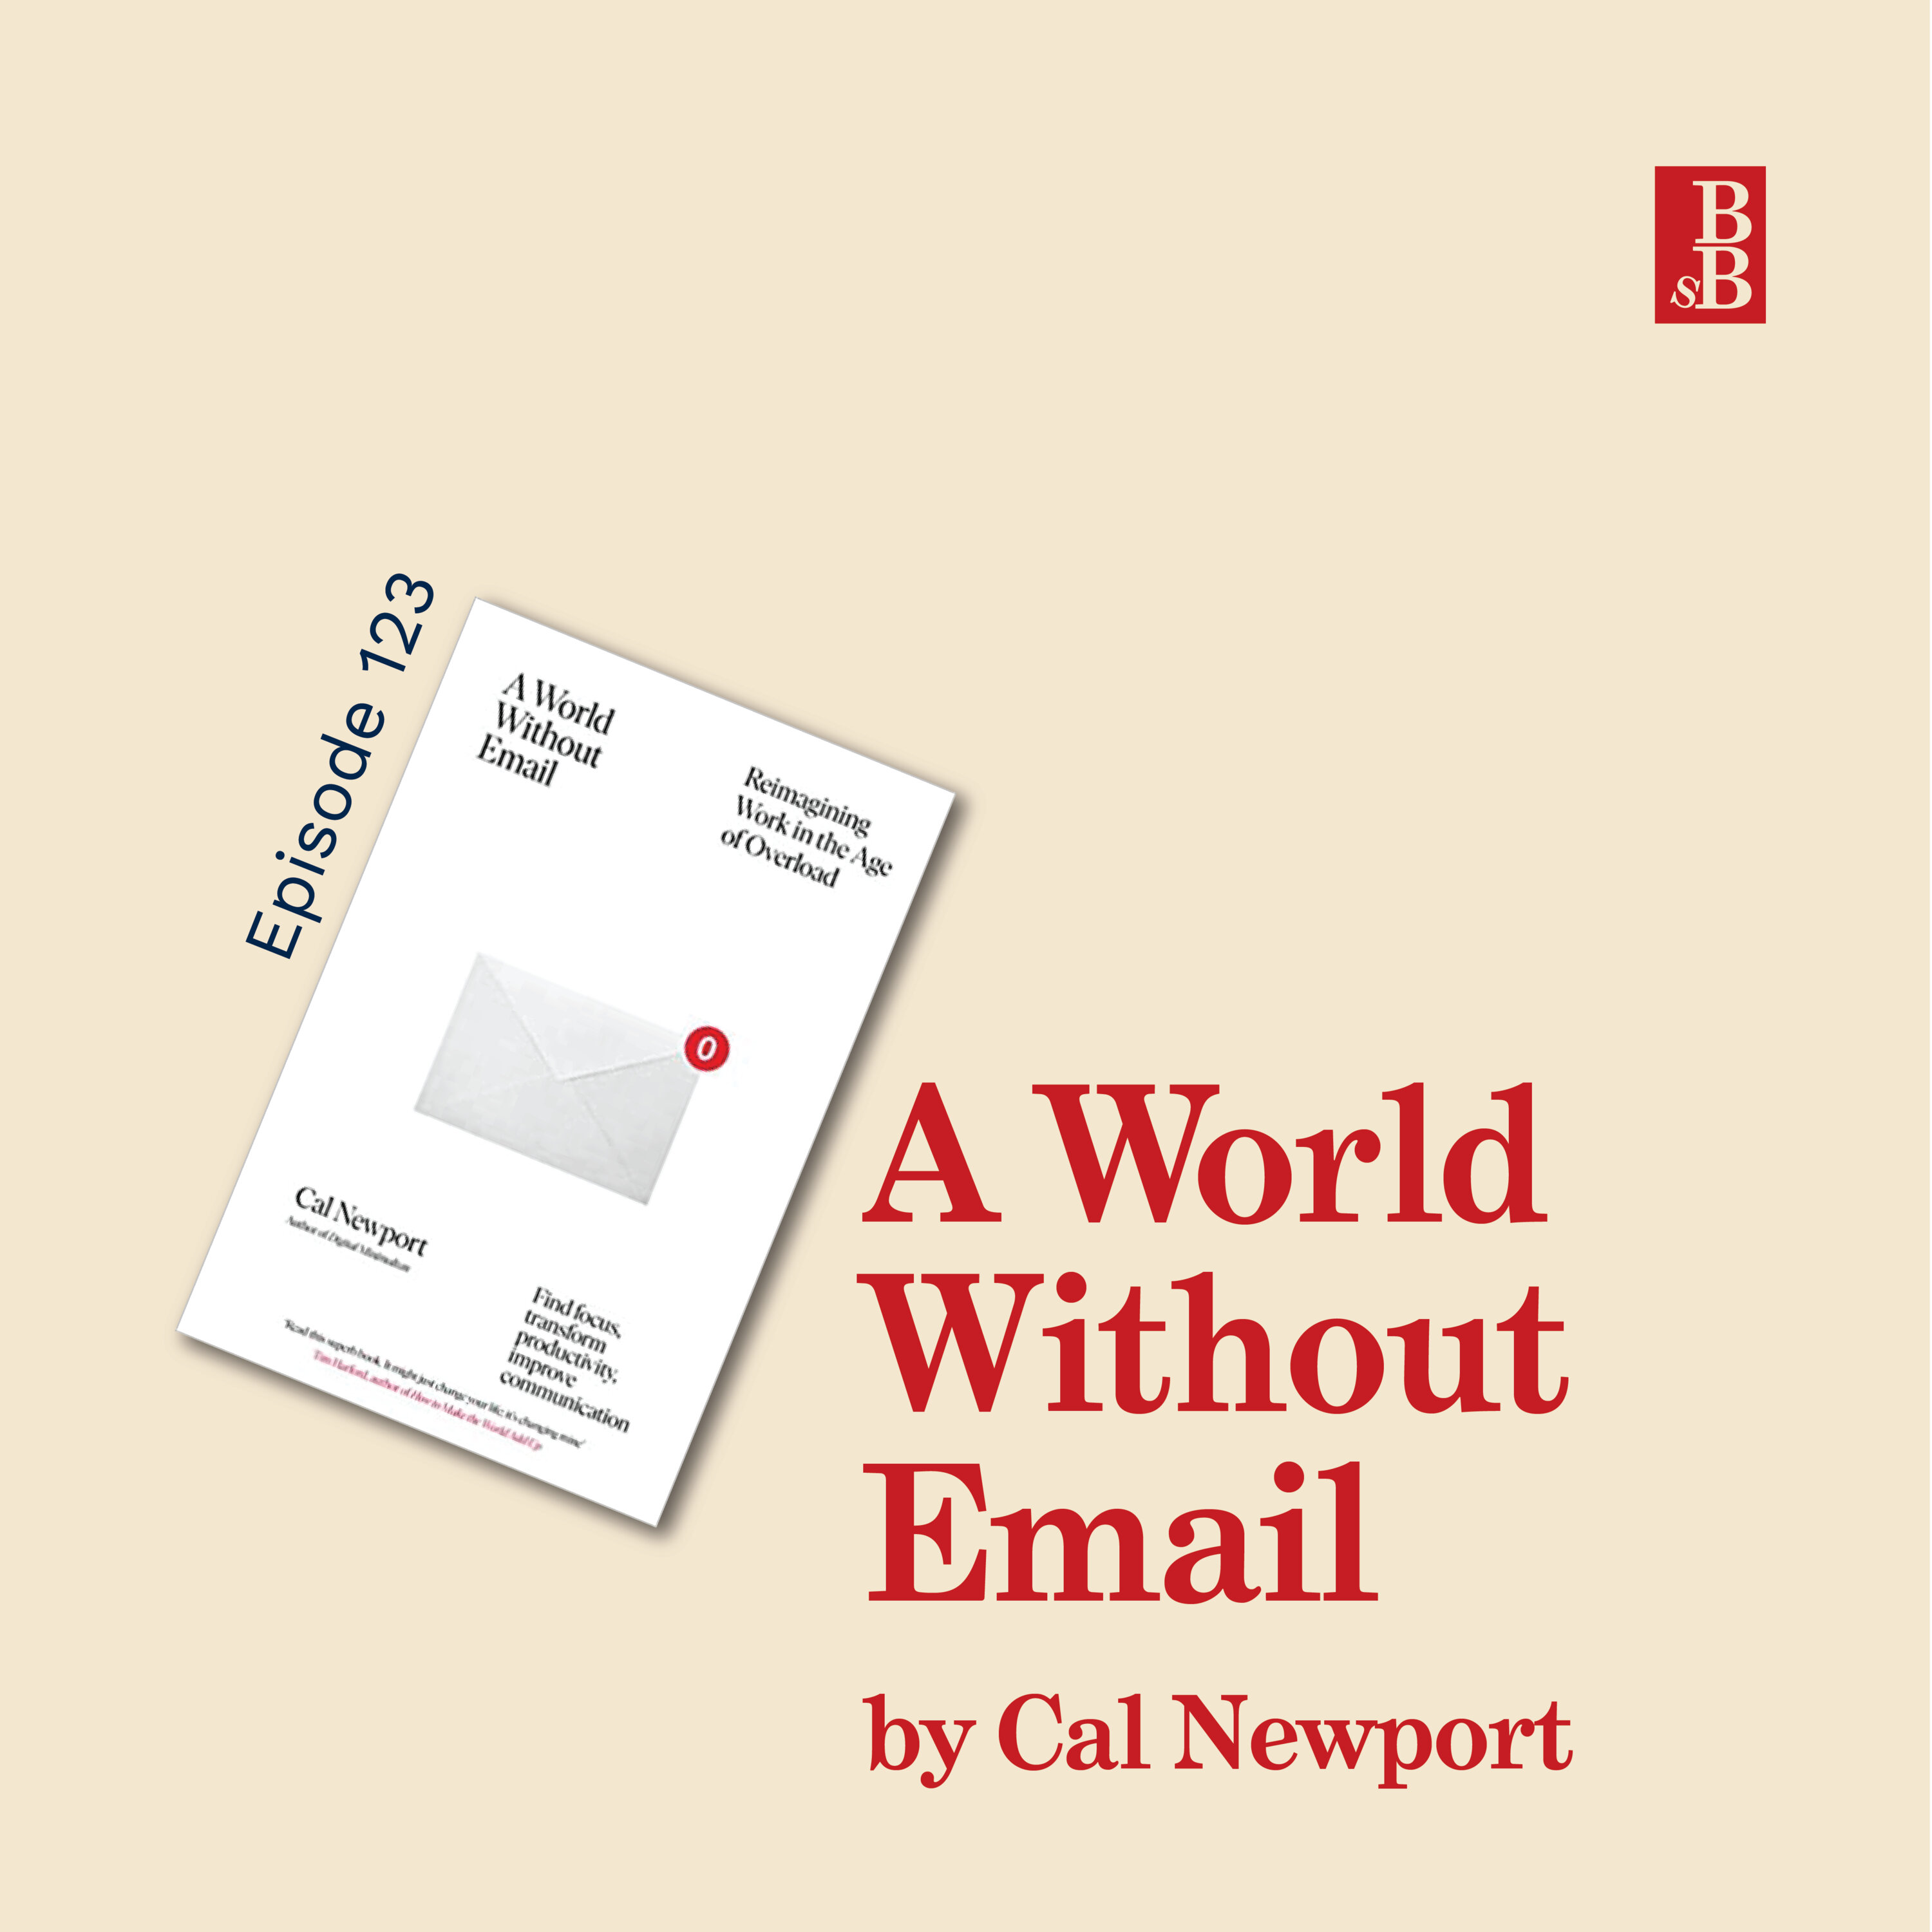 A World Without Email by Cal Newport - why you need to rethink your relationship with your inbox